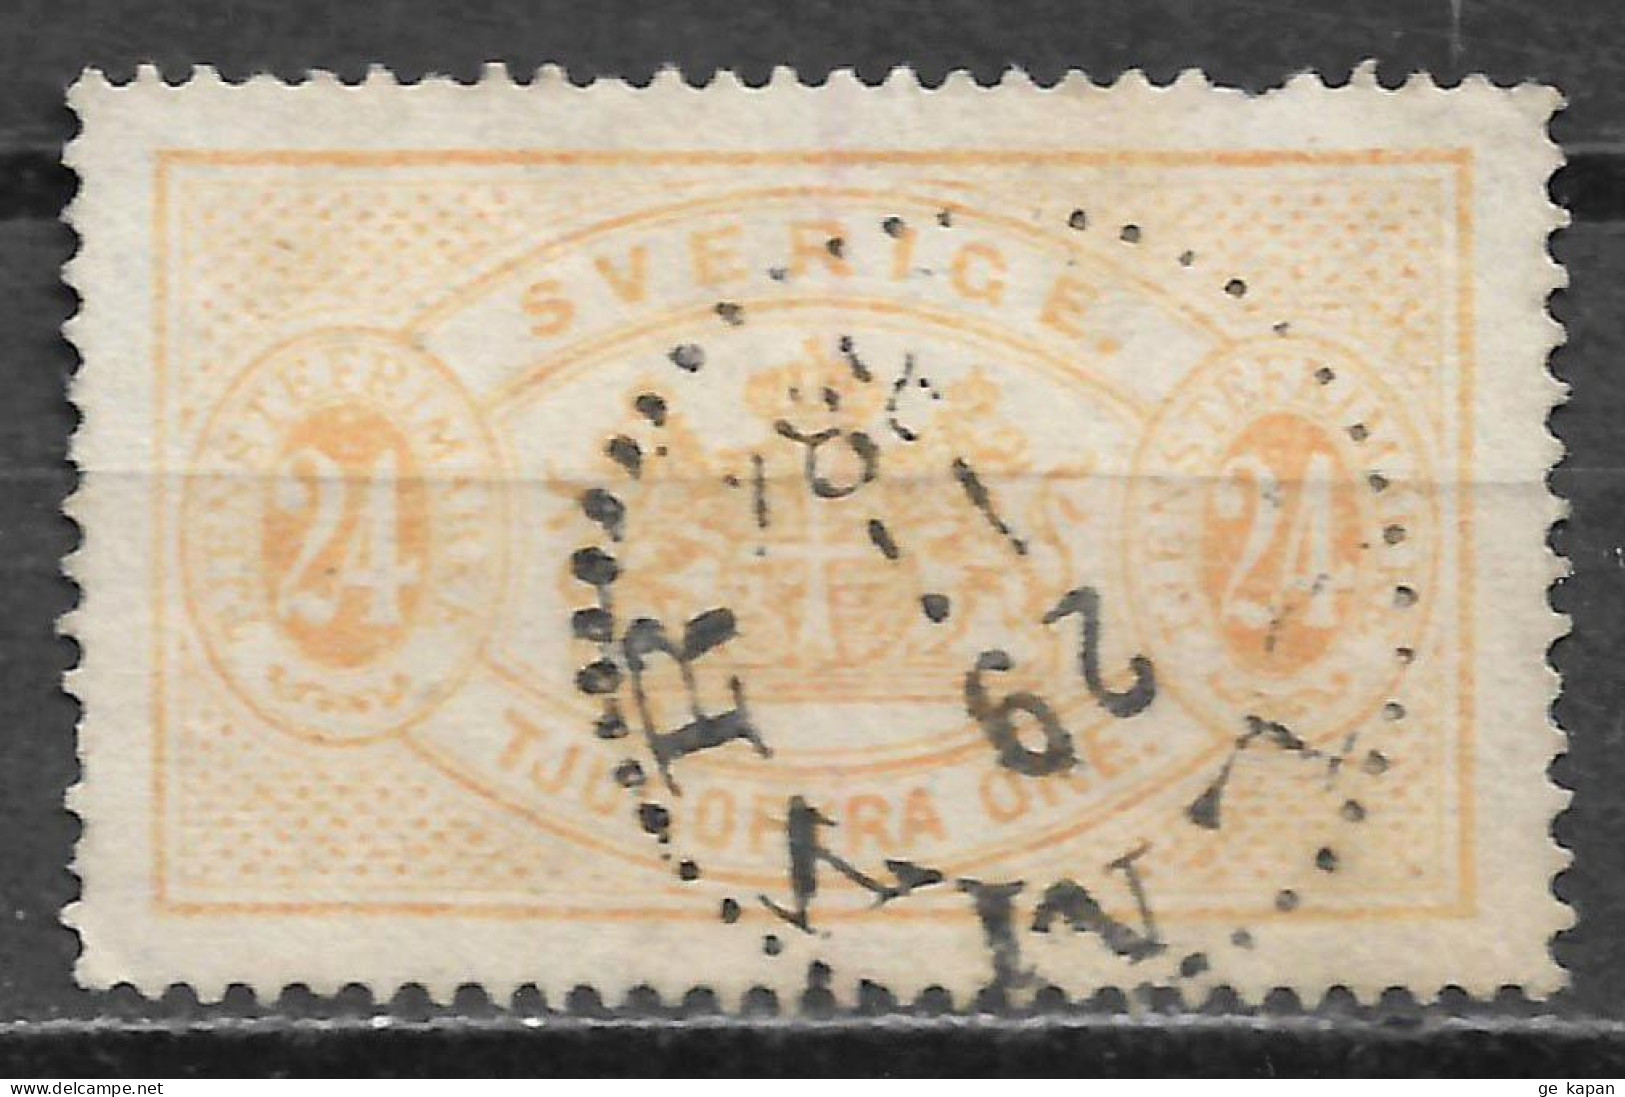 1881 SWEDEN Official USED STAMP Perf.13 (Scott # O21a) CV $22.50 - Oficiales